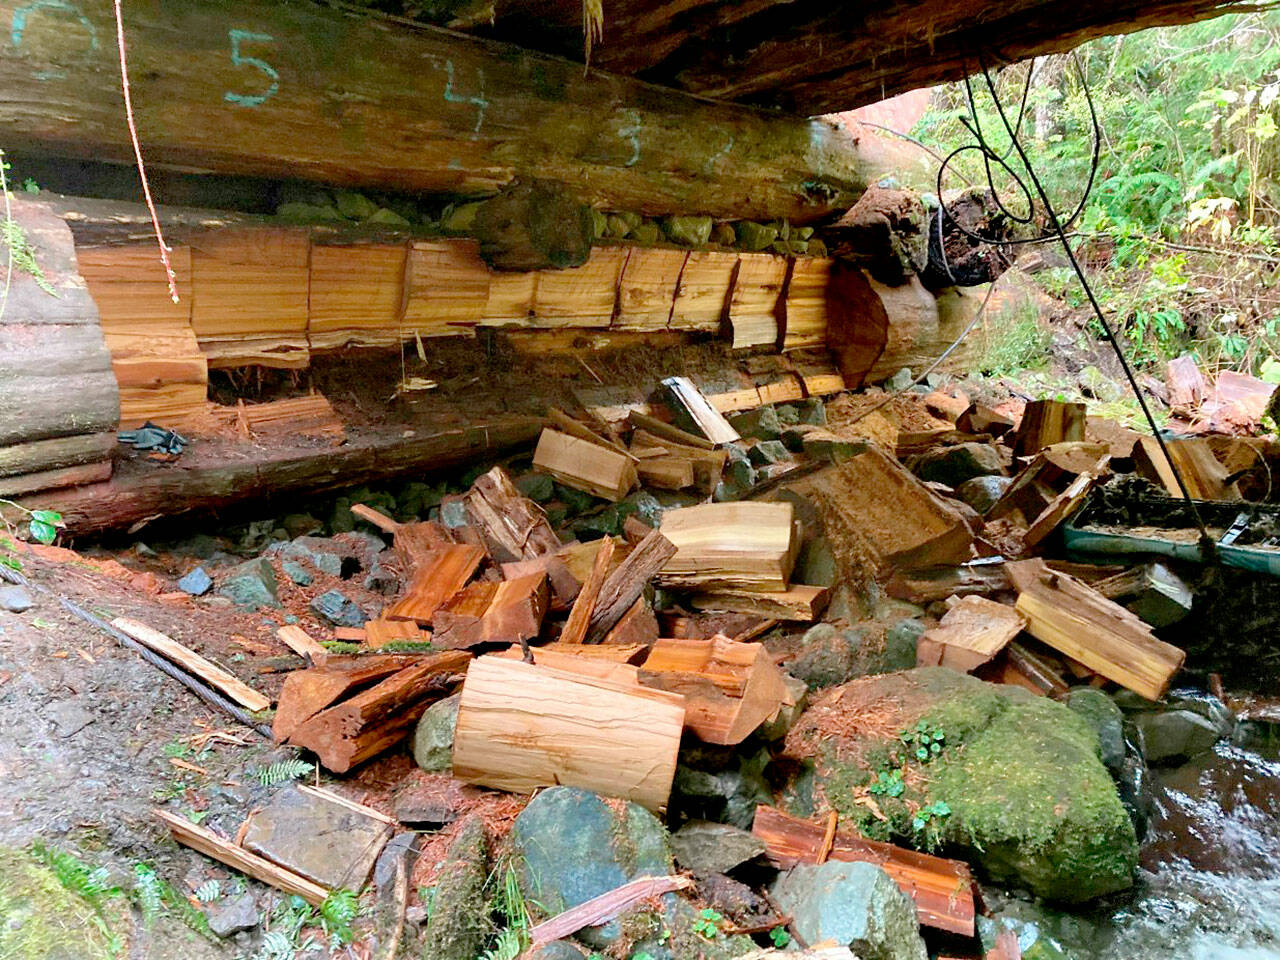 Two Forks men are accused of cutting chunks of cedar from a state Department of Natural Resources bridge at a DNR property on the Upper Hoh Road in West Jefferson County. (Photo courtesy of Department of Natural Resources)